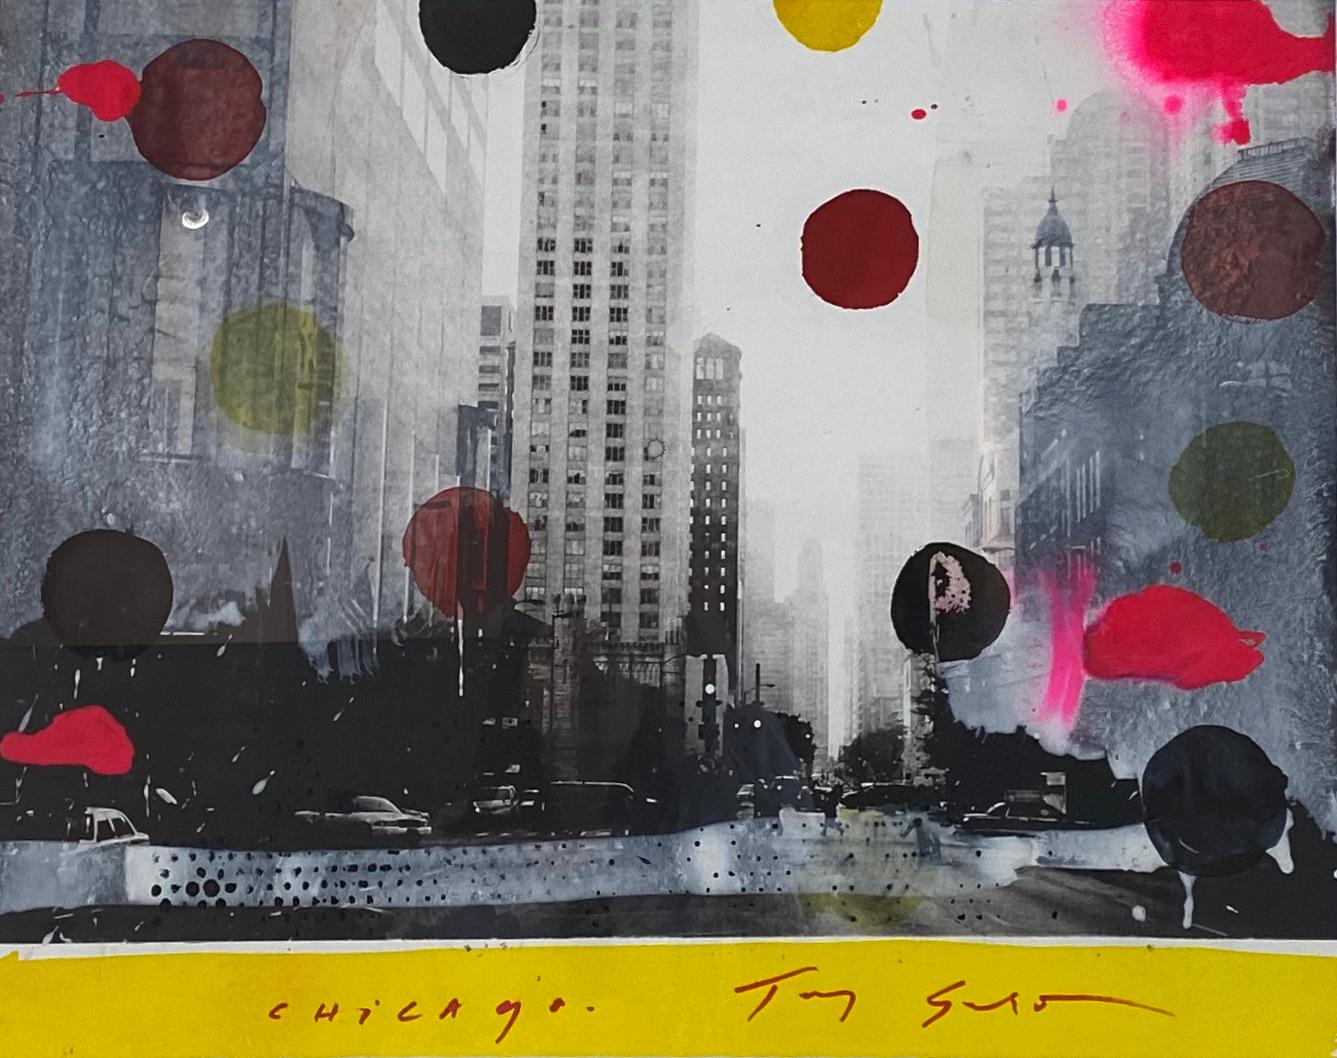 "Chicago" by Tony Soulié (20x20in), 2019 - Mixed Media Art by Tony Soulie